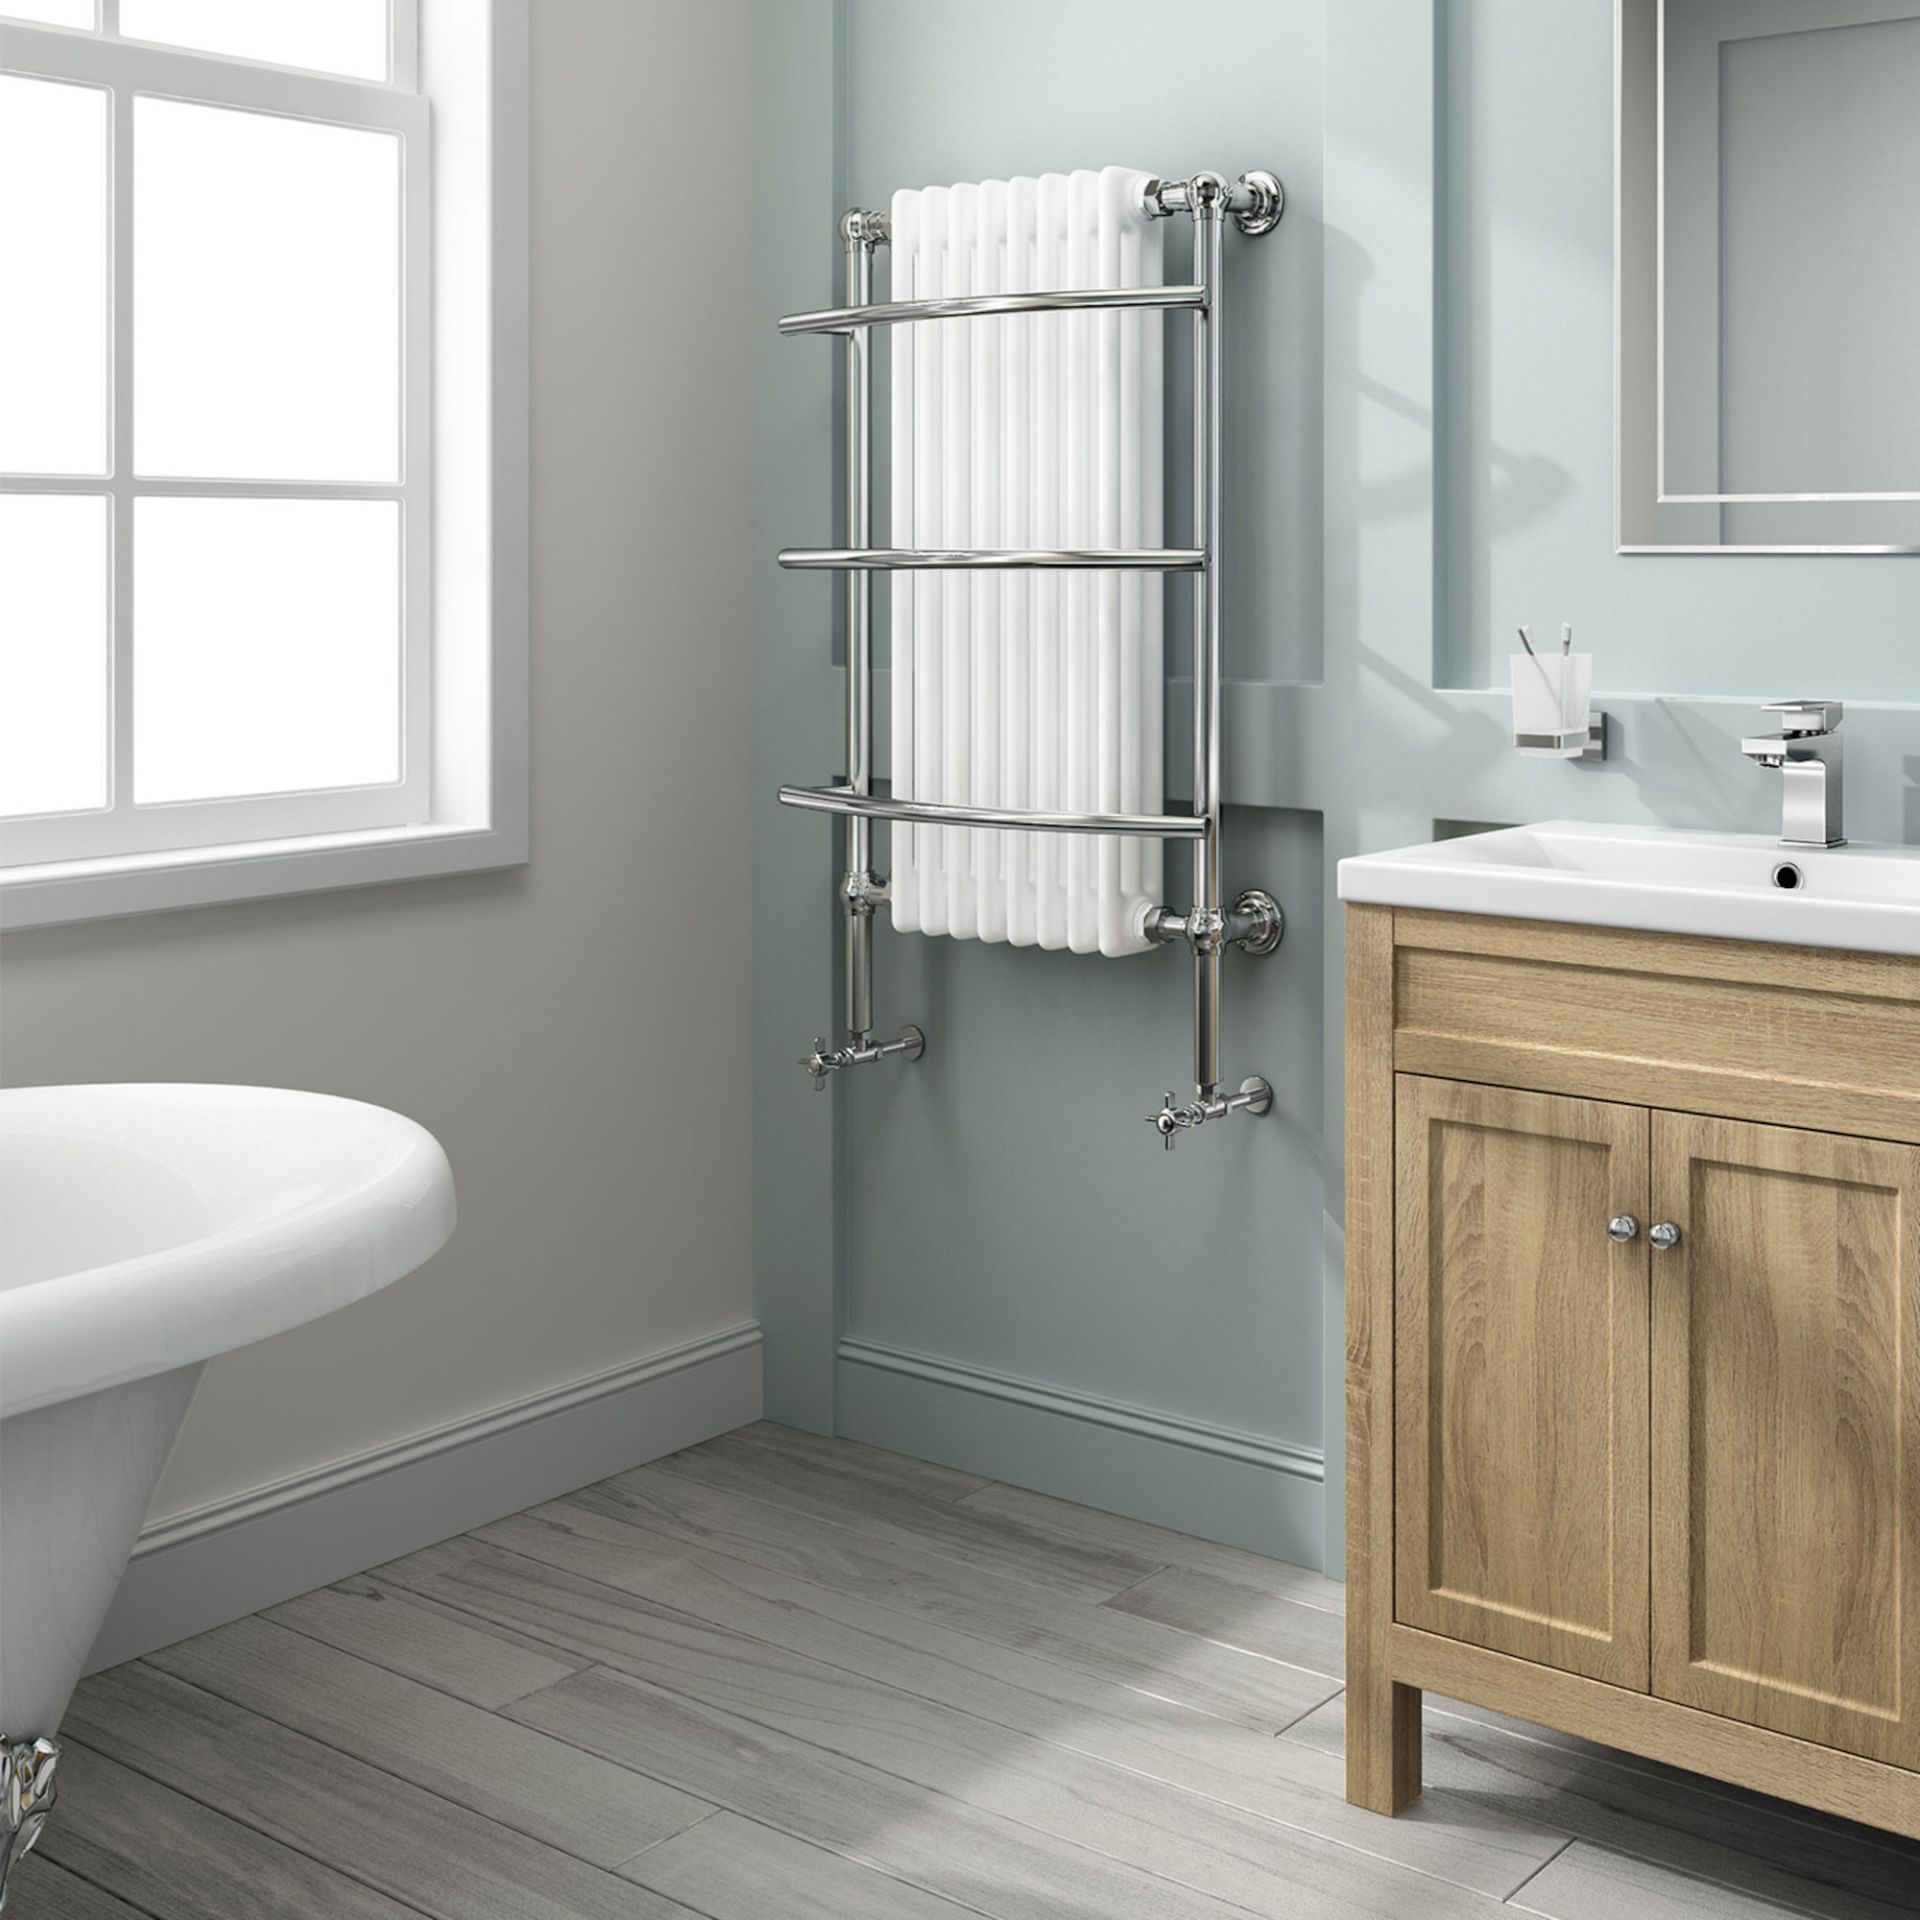 (ZL12) 1000x635mm Traditional White Wall Mounted Towel Rail Radiator - Cambridge. RRP £399.95. - Image 2 of 3